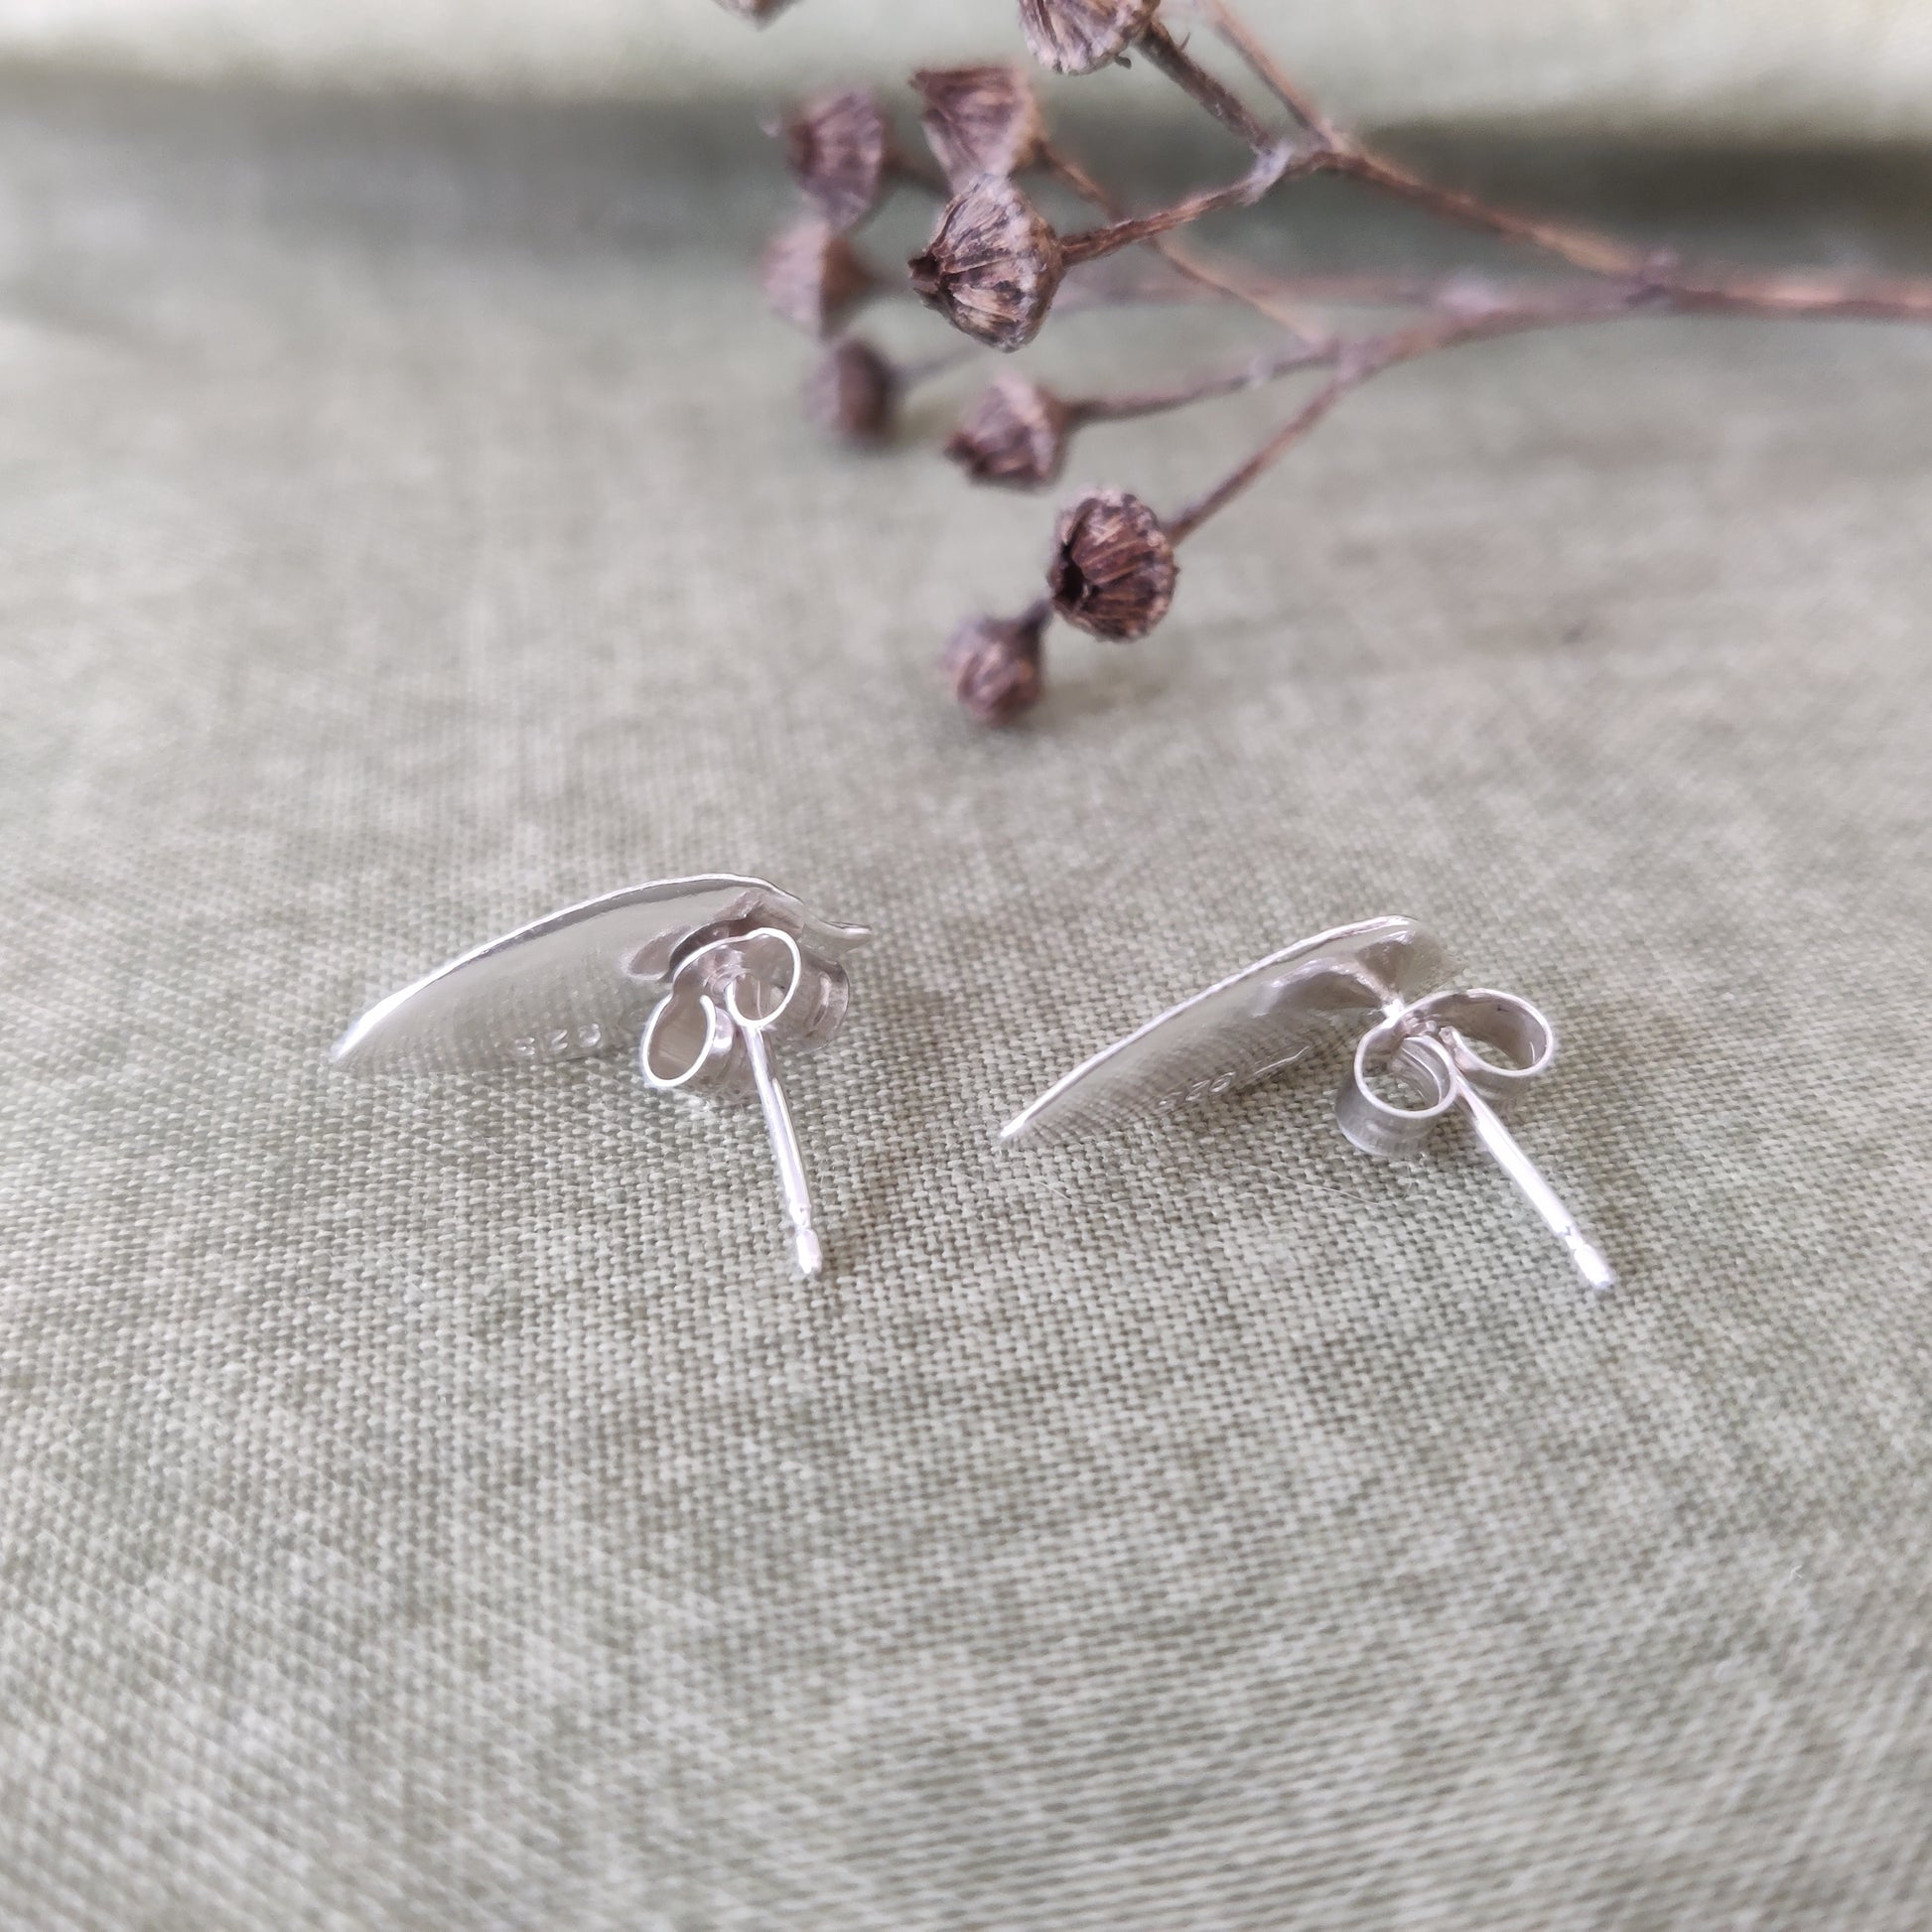 woodland inspired silver stud earrings by Notion Jewellery